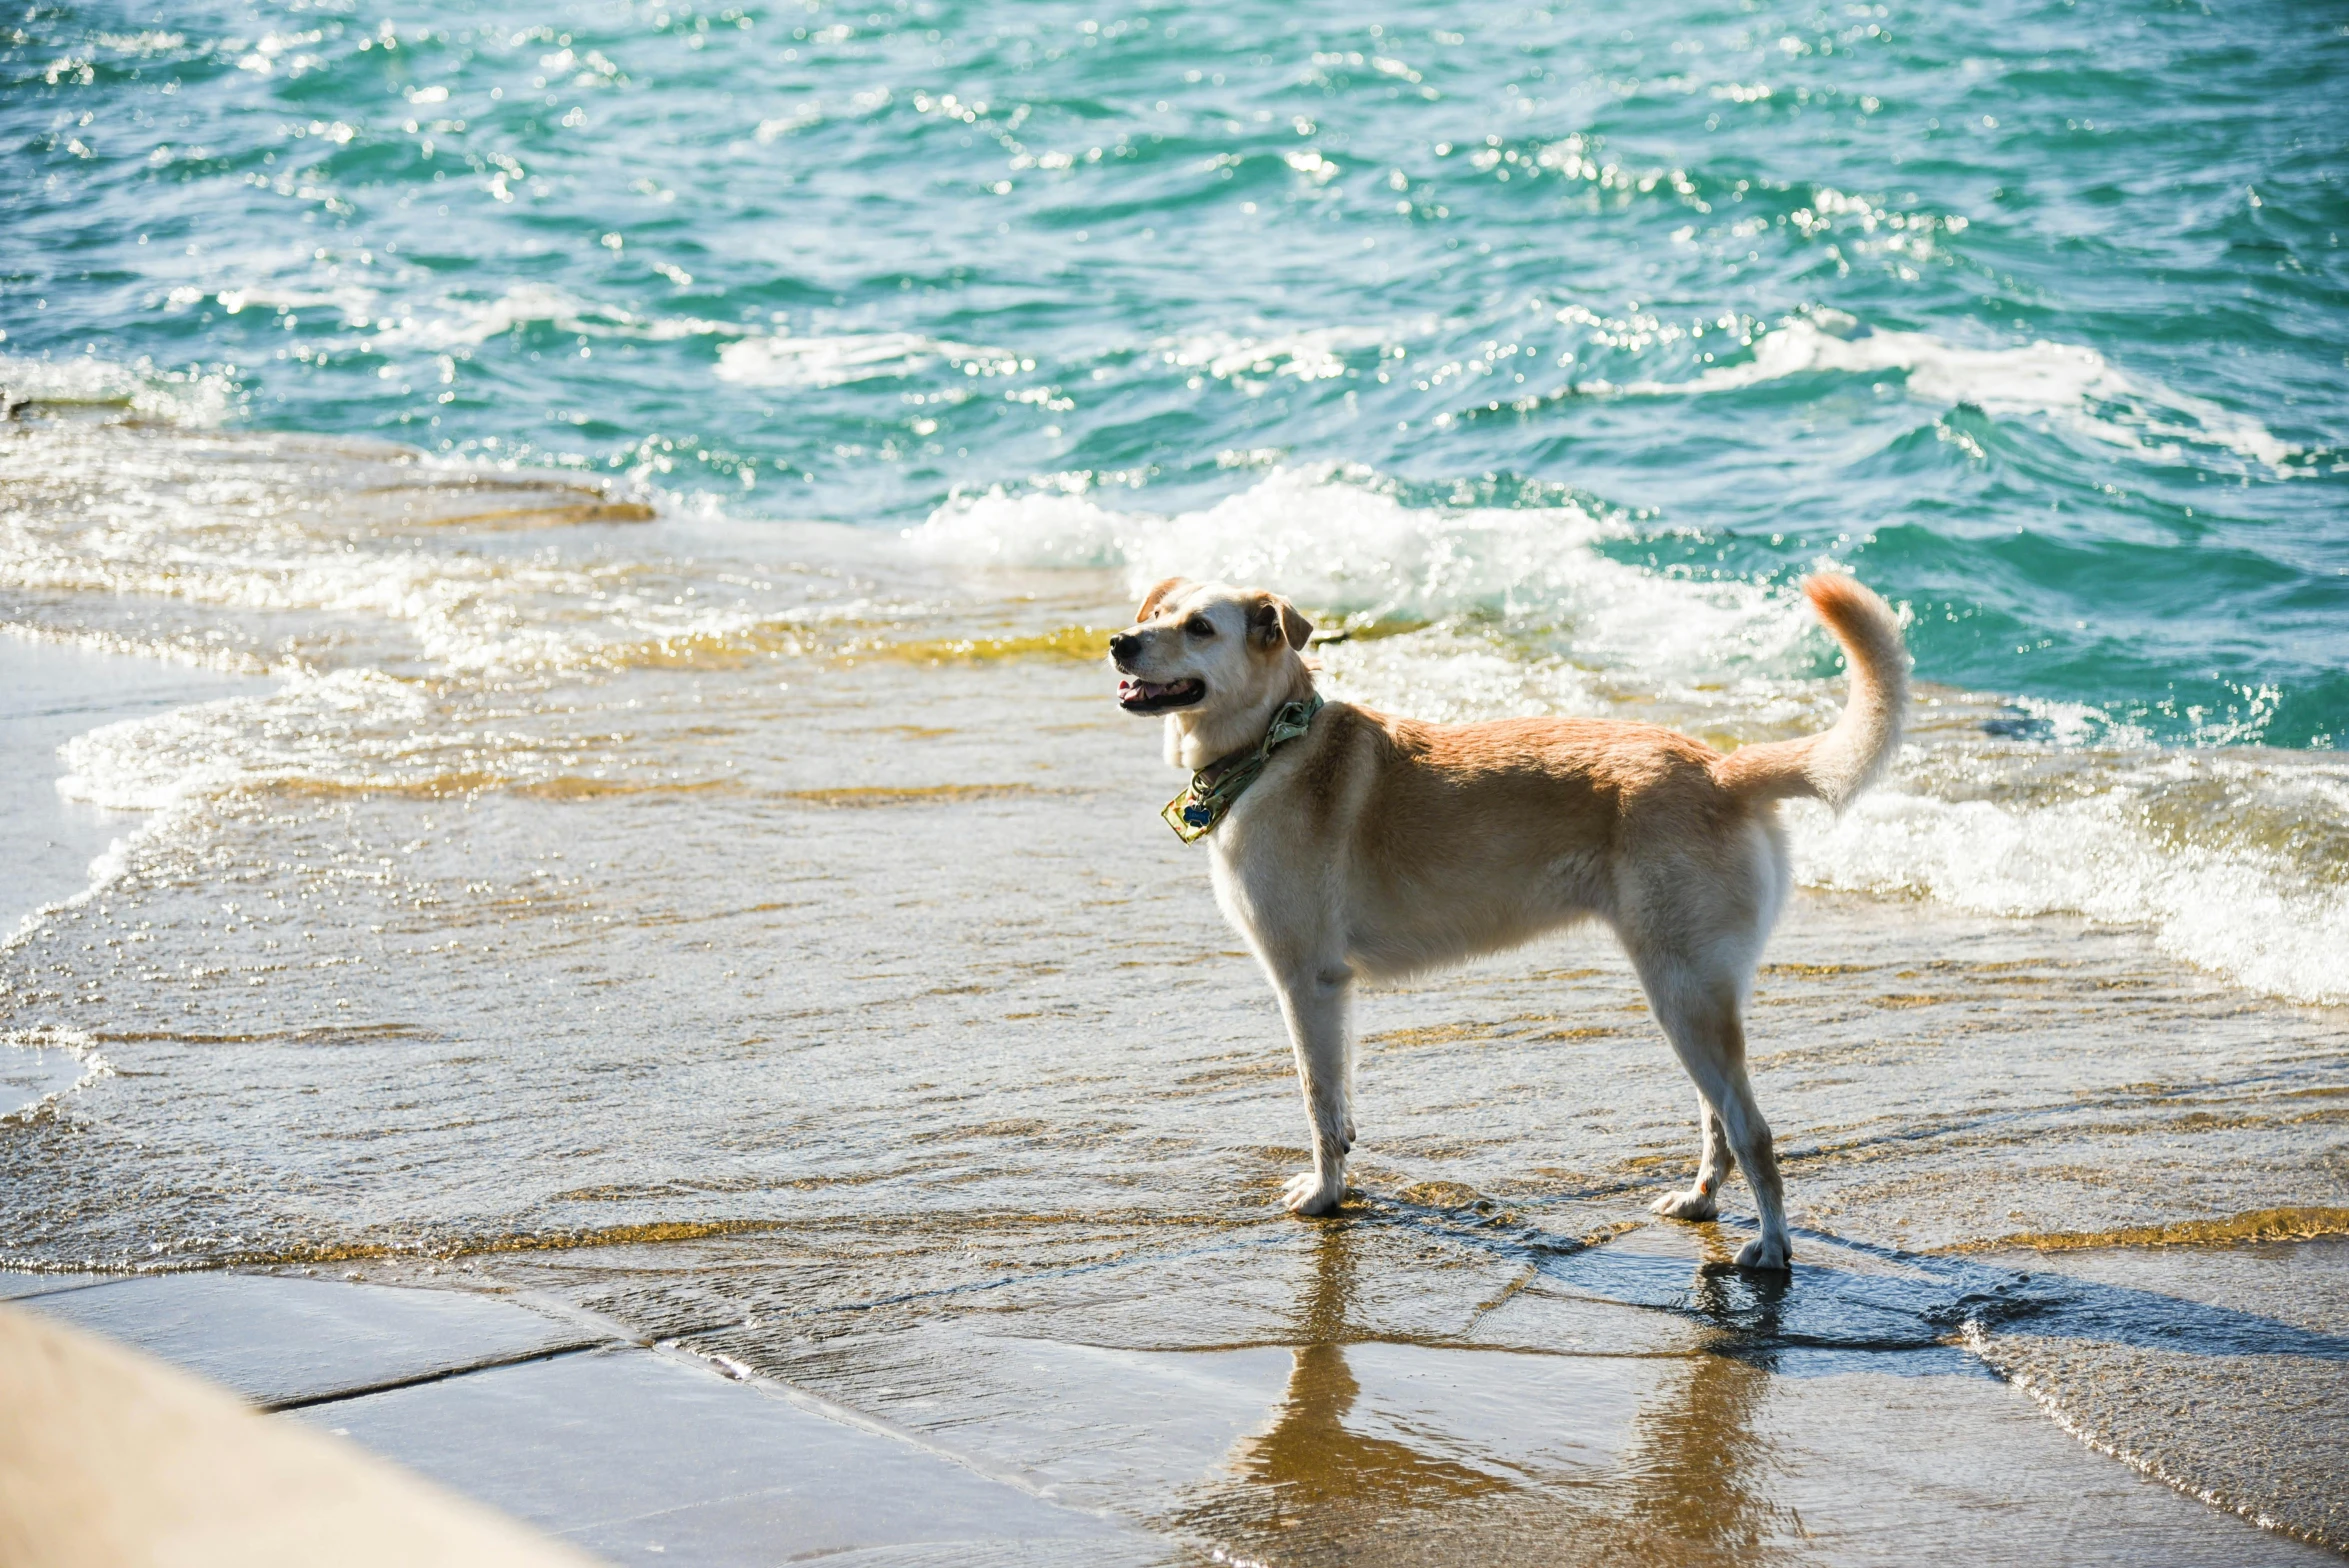 a dog standing on a beach next to the ocean, manly, tail raised, multiple stories, mediterranean